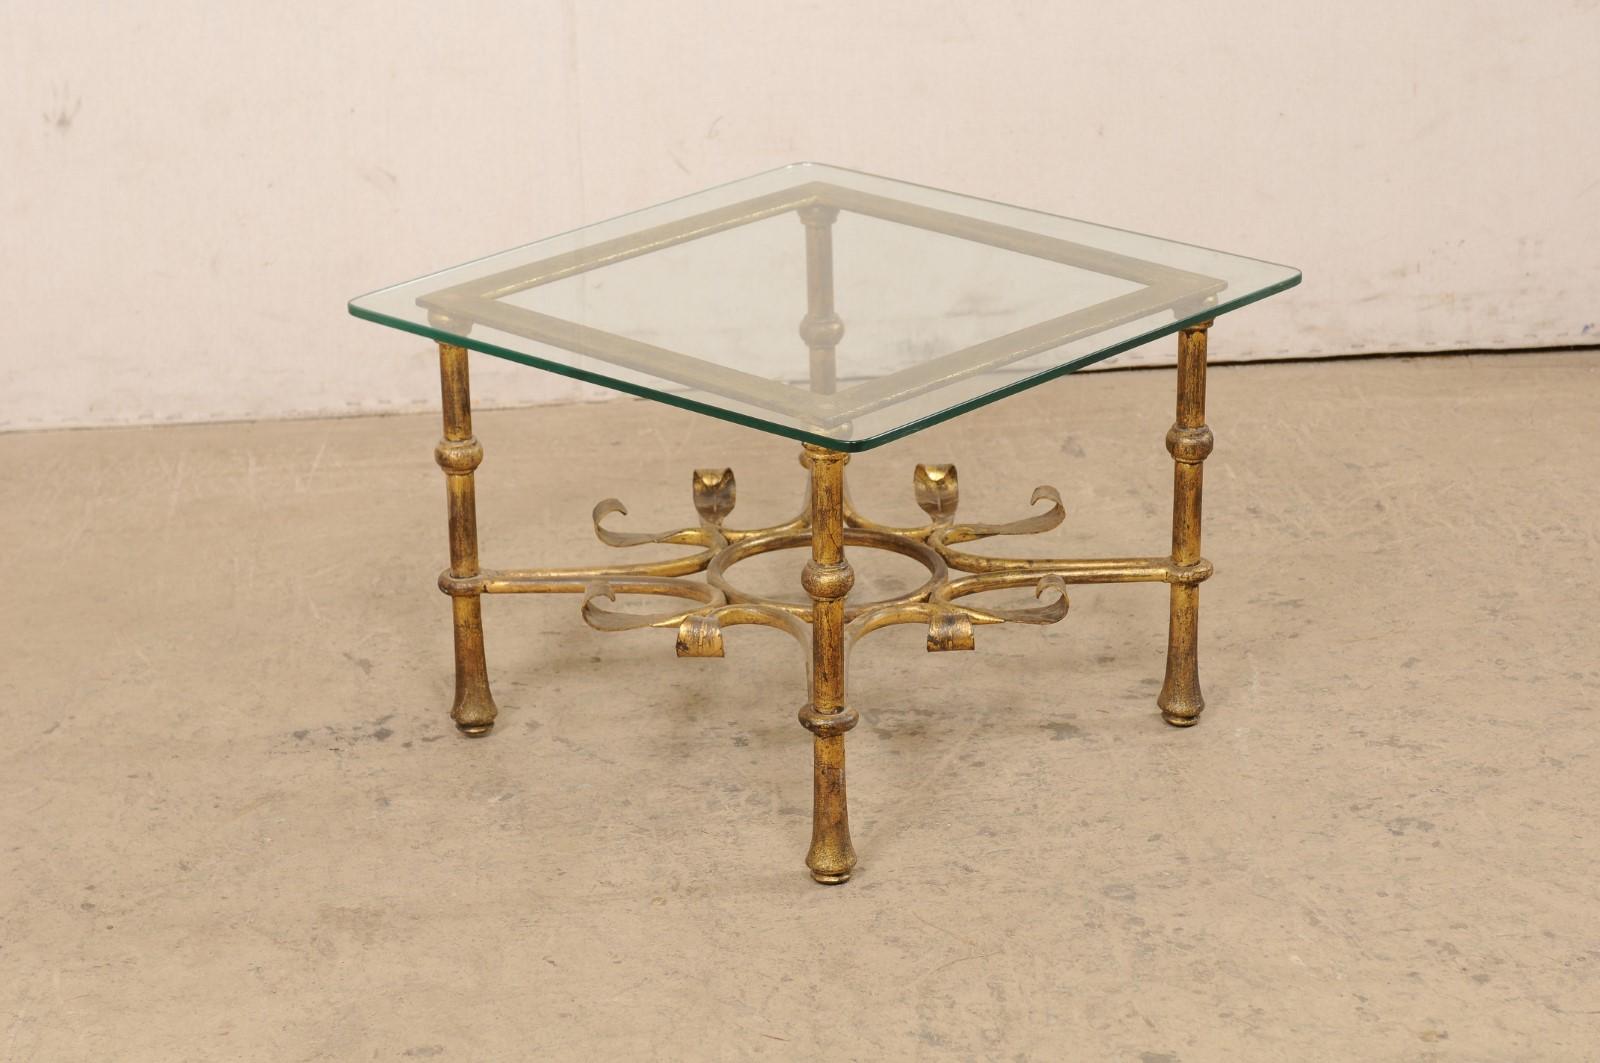 Spanish Accent Table with Gilt Iron Base & Square-Shaped Glass Top, Mid 20th C. For Sale 6